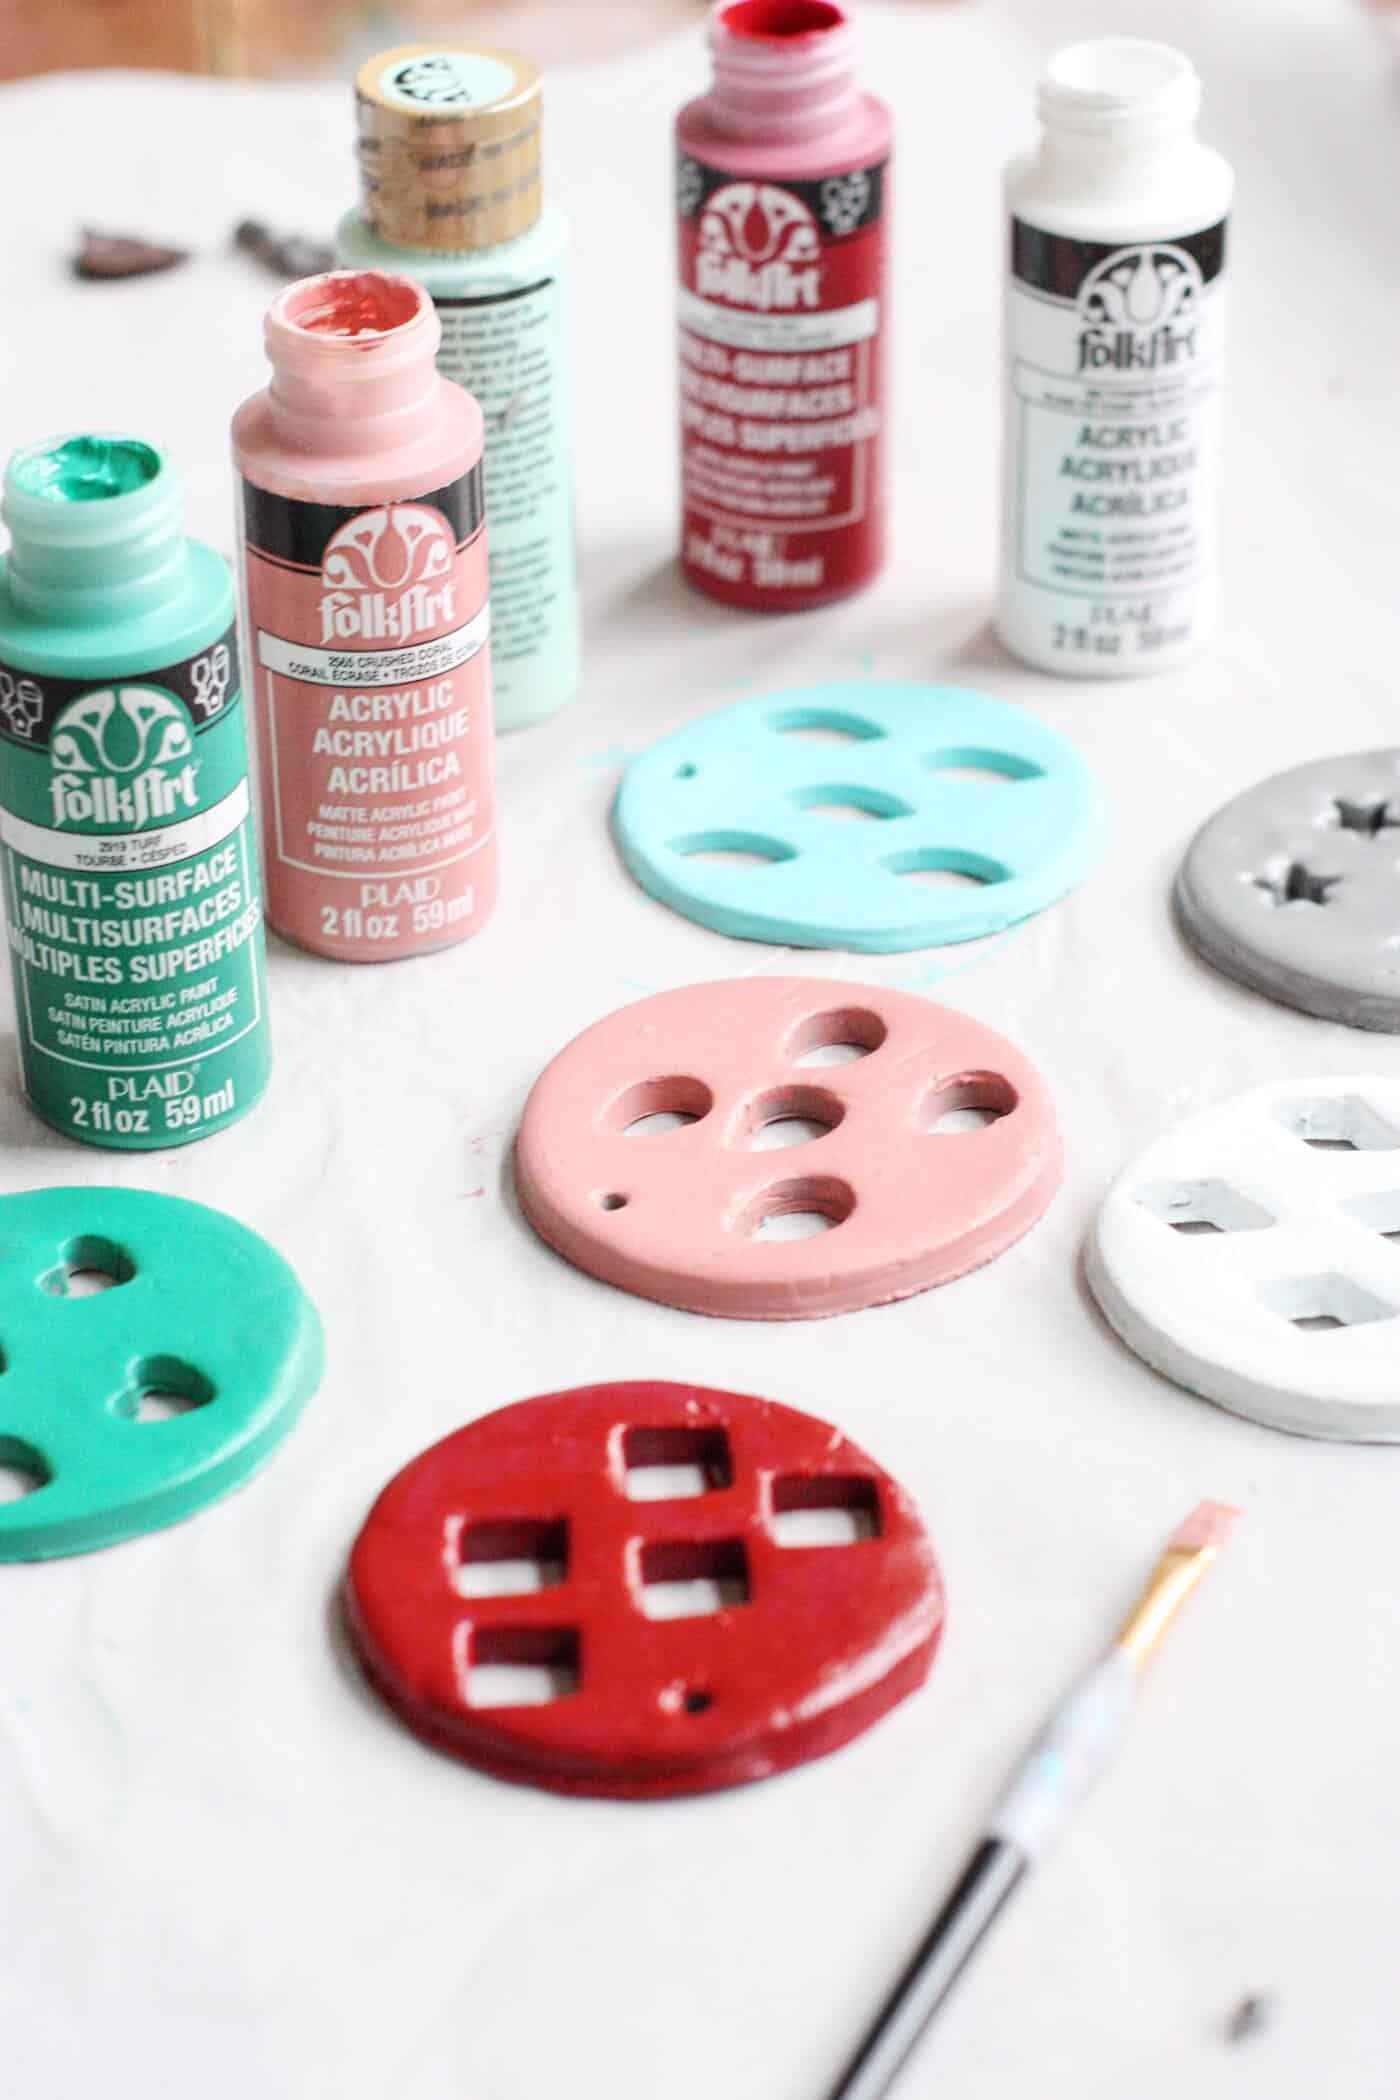 Bottles of acrylic paint and painted clay Christmas ornaments